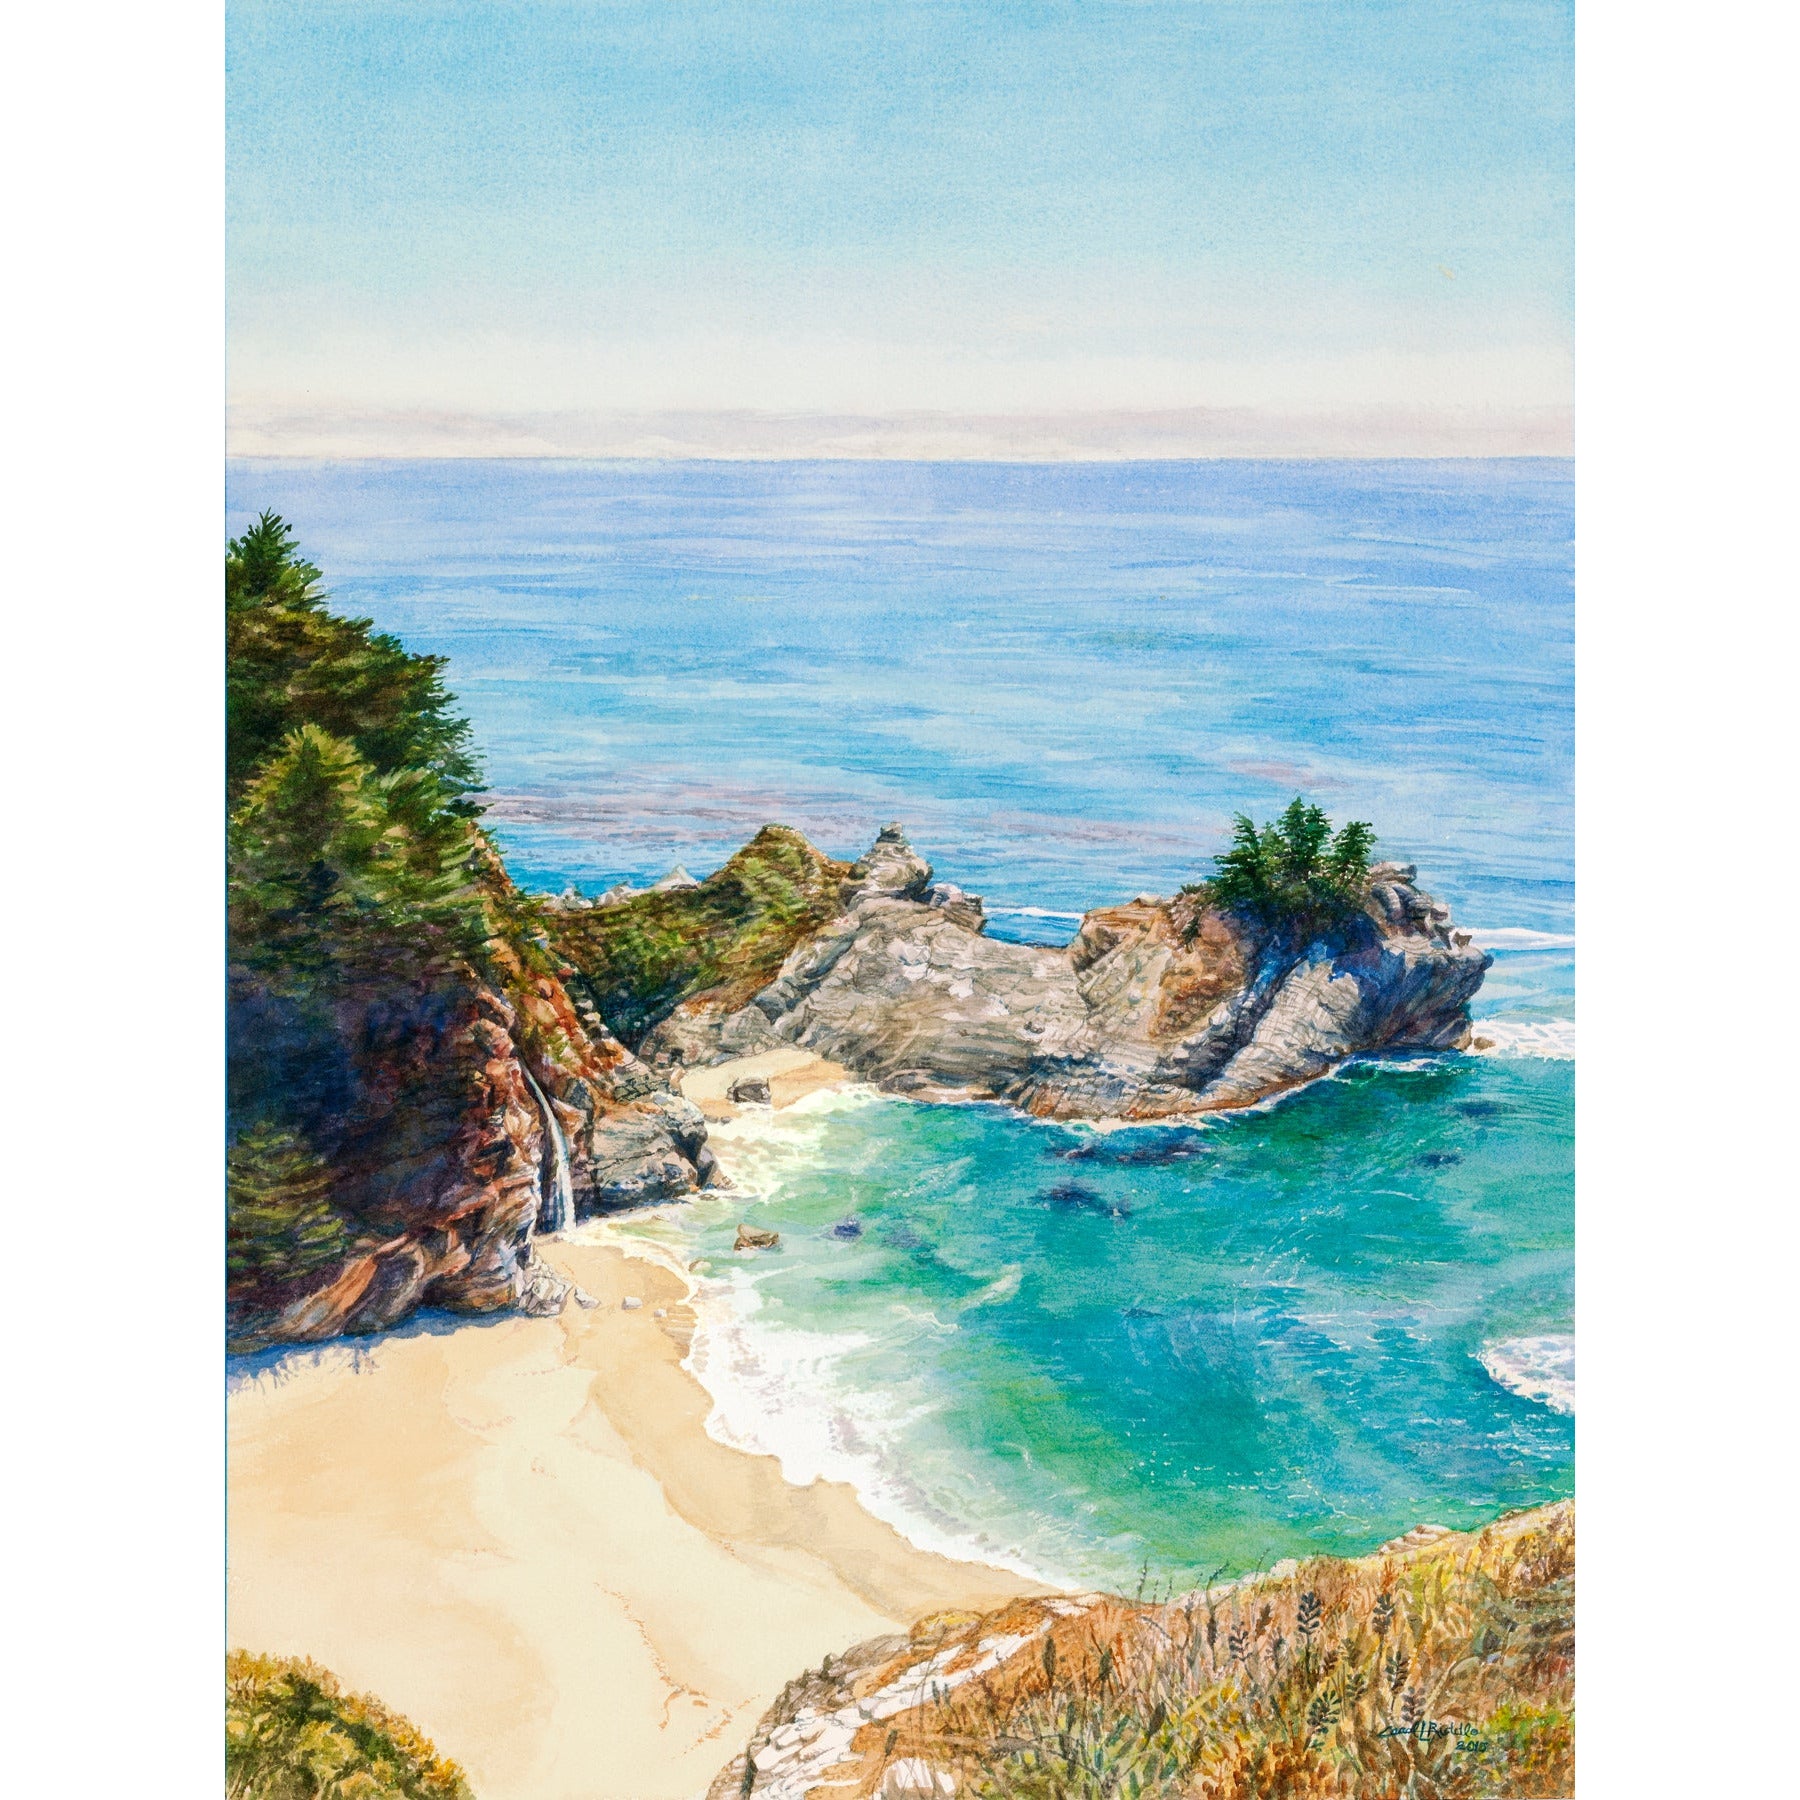 McWay Falls - Zinnias Gift Boutique